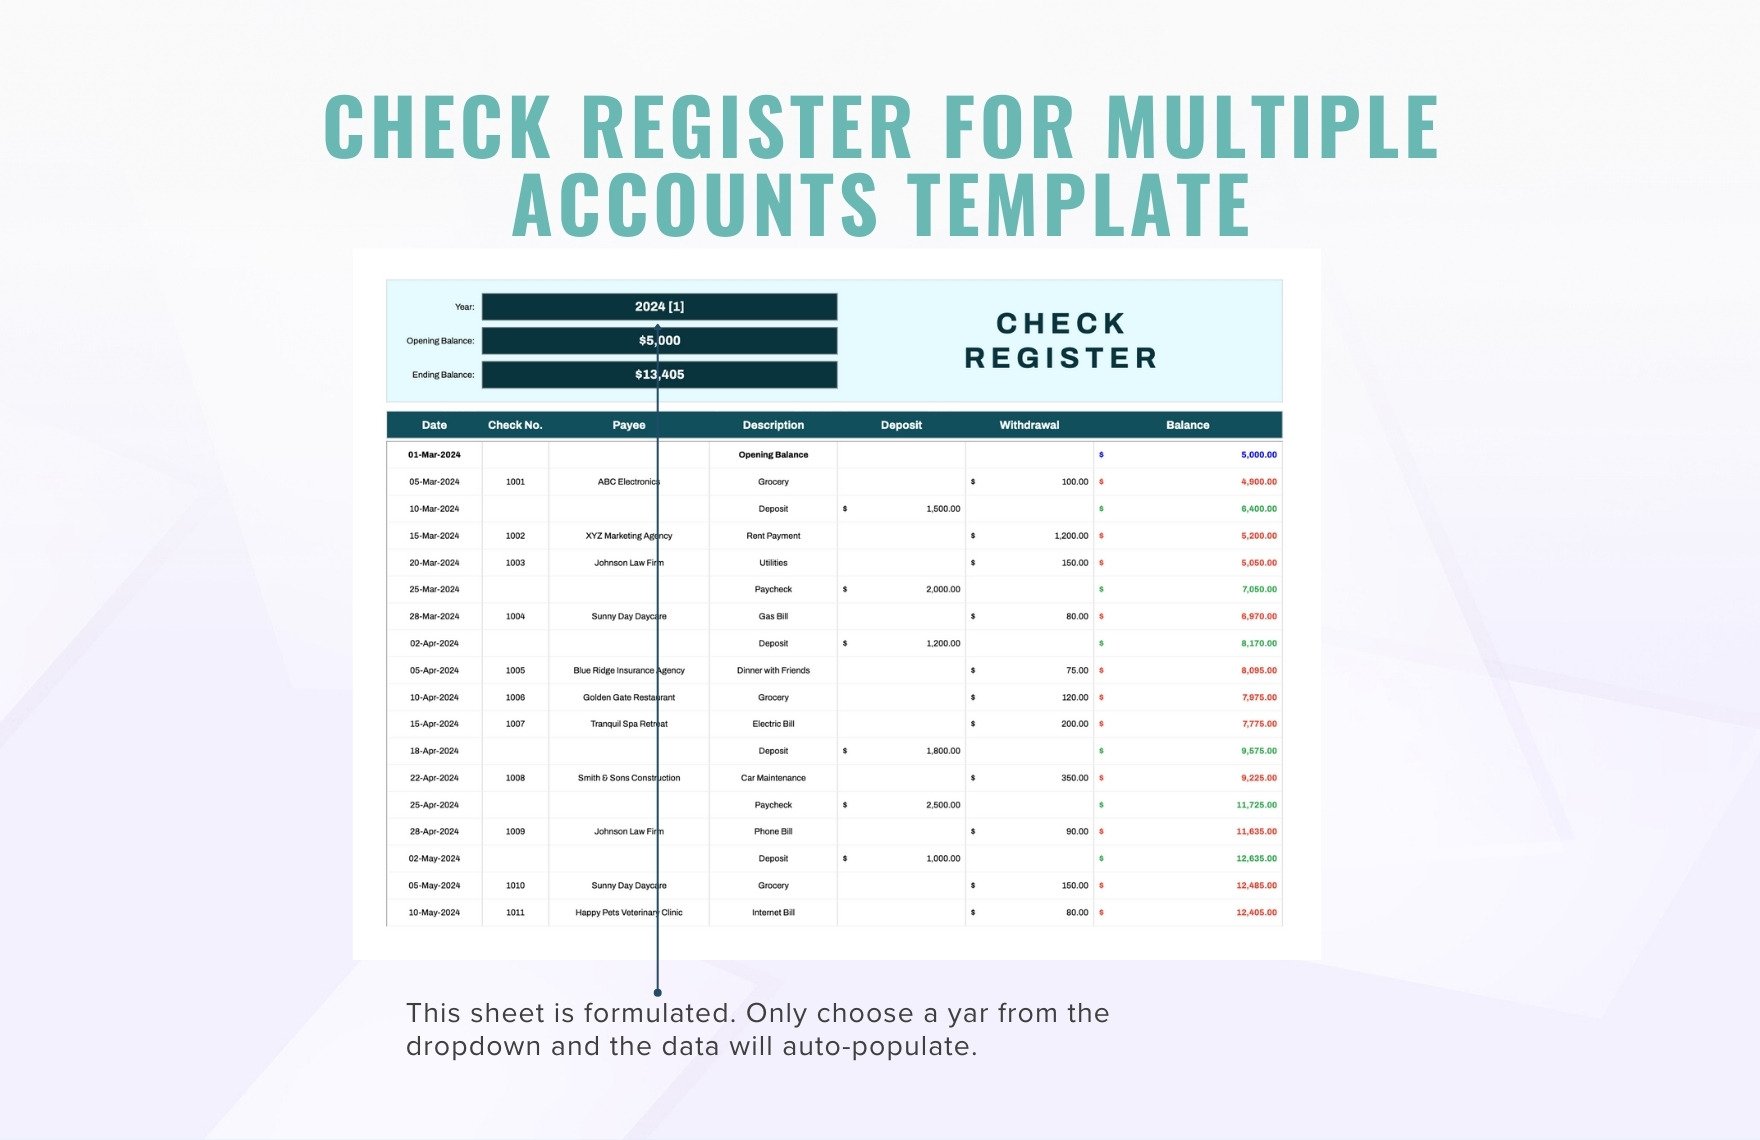 Check Register for Multiple Accounts Template